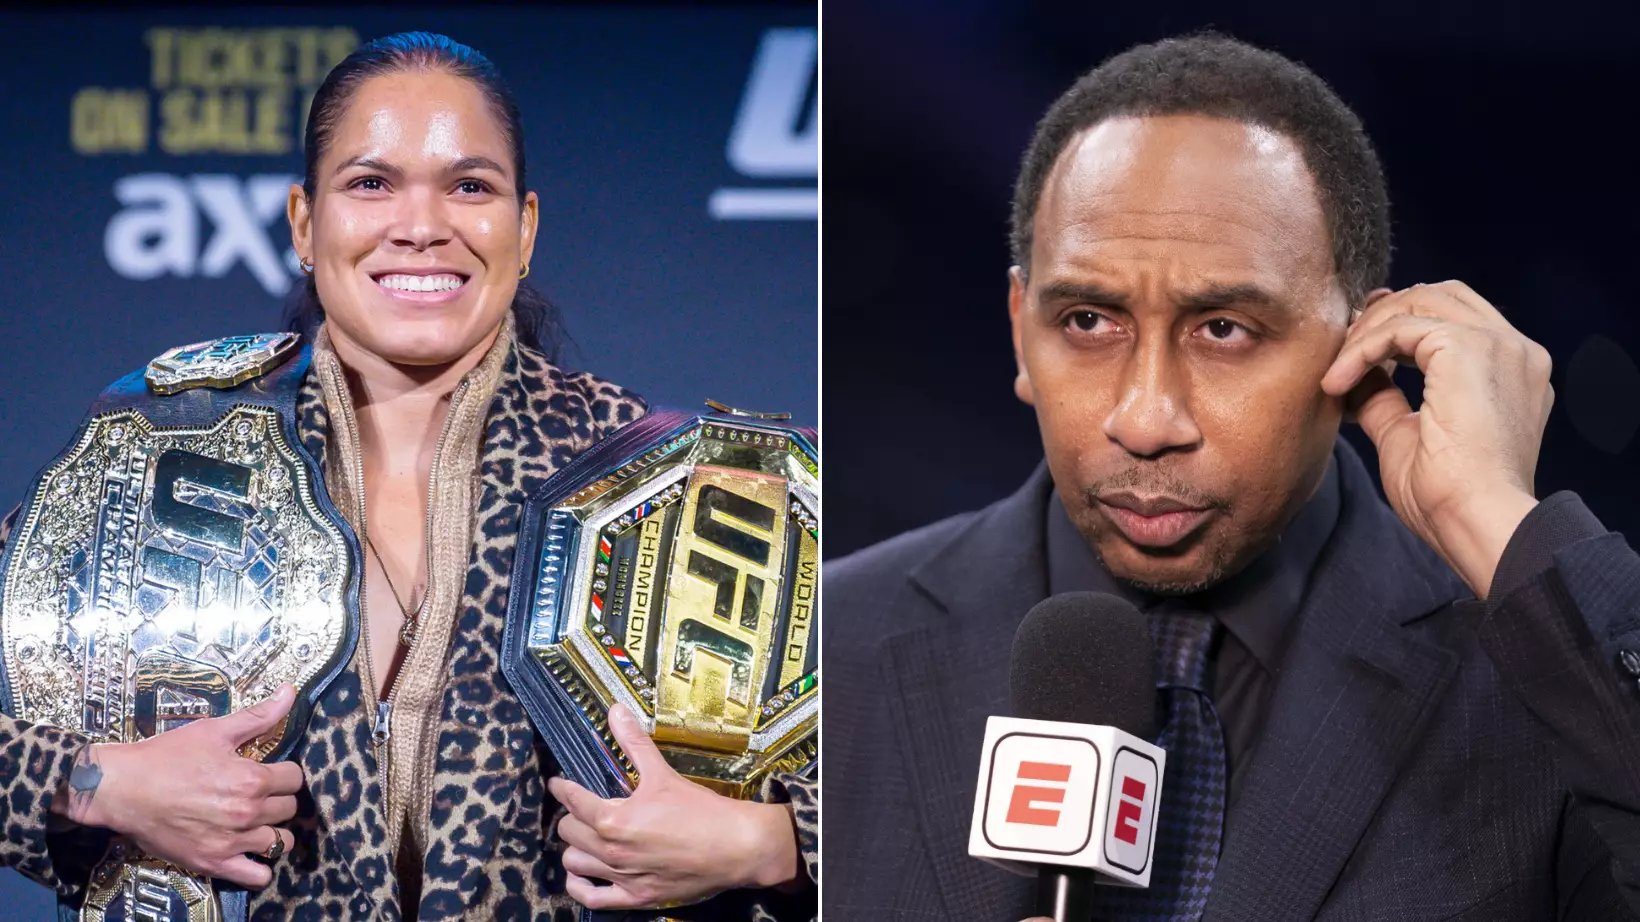 Stephen A. Smith On Women In UFC: "I Don’t Want To See Women Fighting In The Octagon"